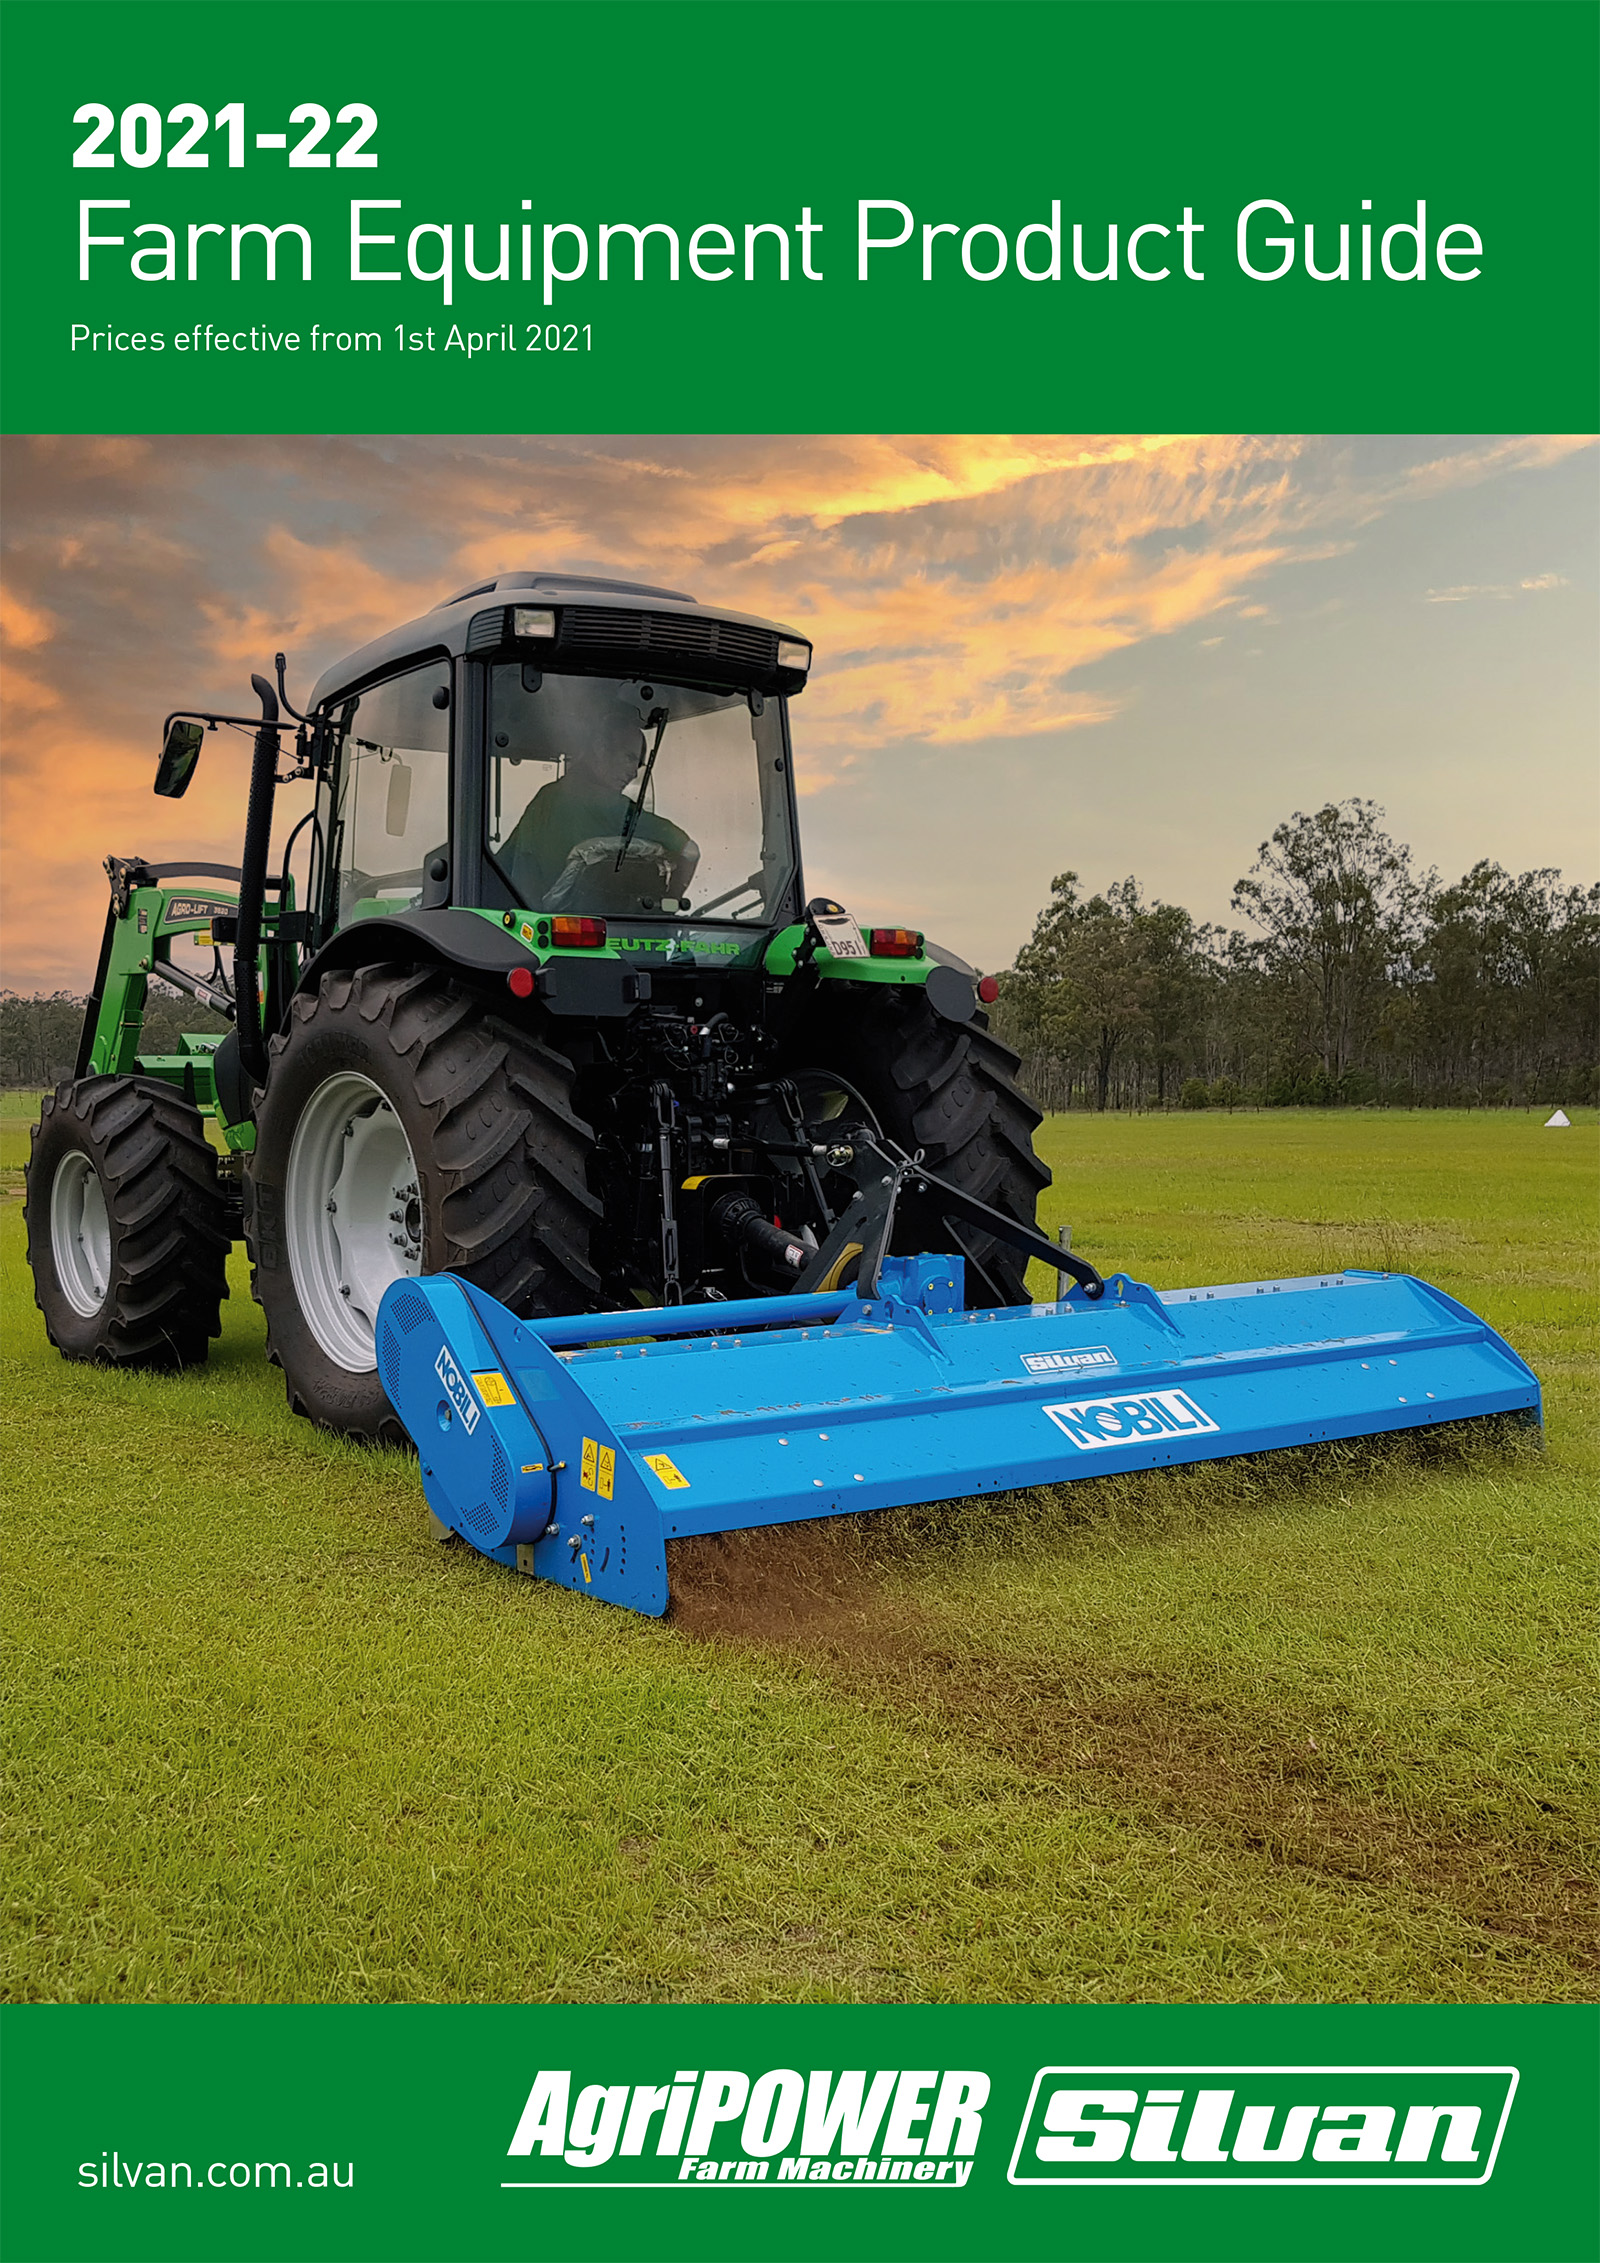 Farming Equipment Product Guide 2021/22